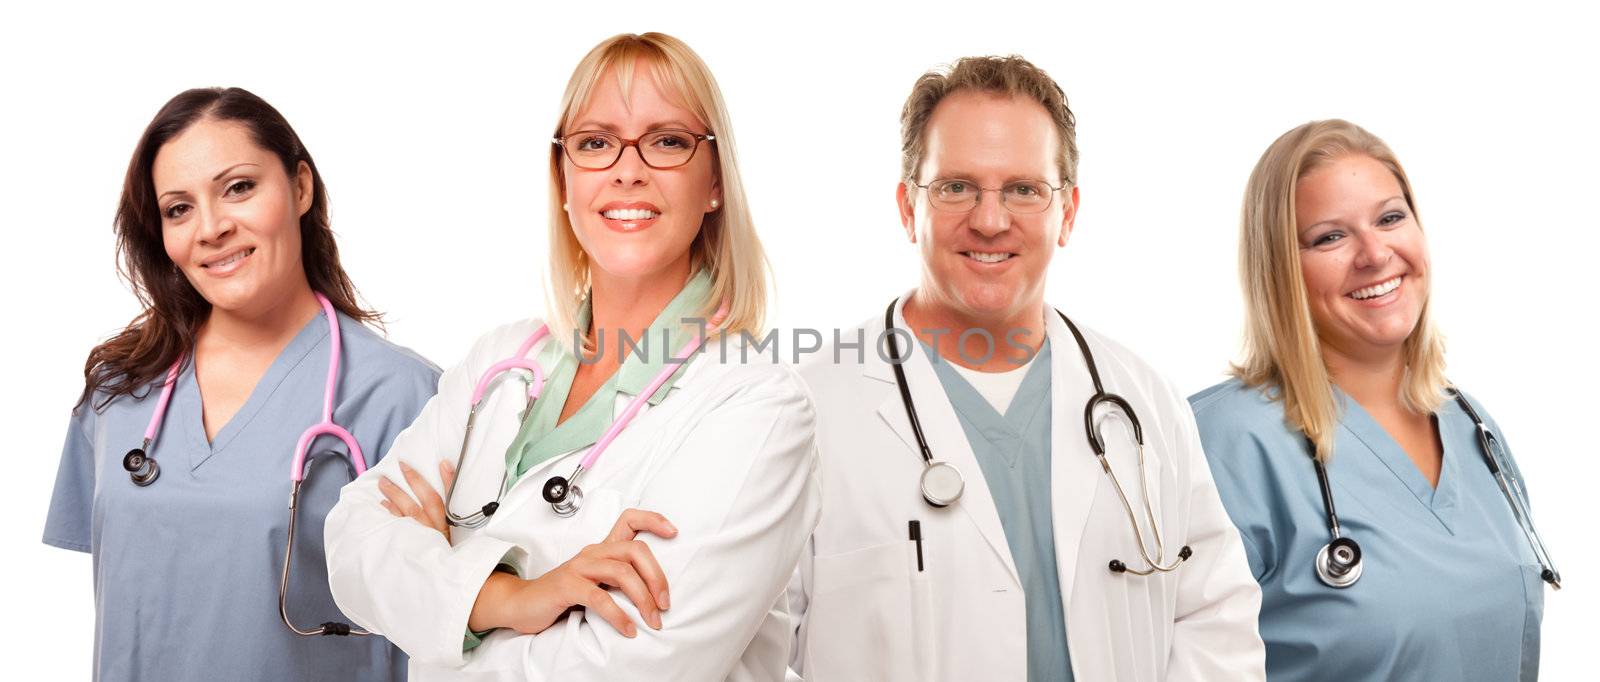 Set of Smiling Male and Female Doctors or Nurses by Feverpitched